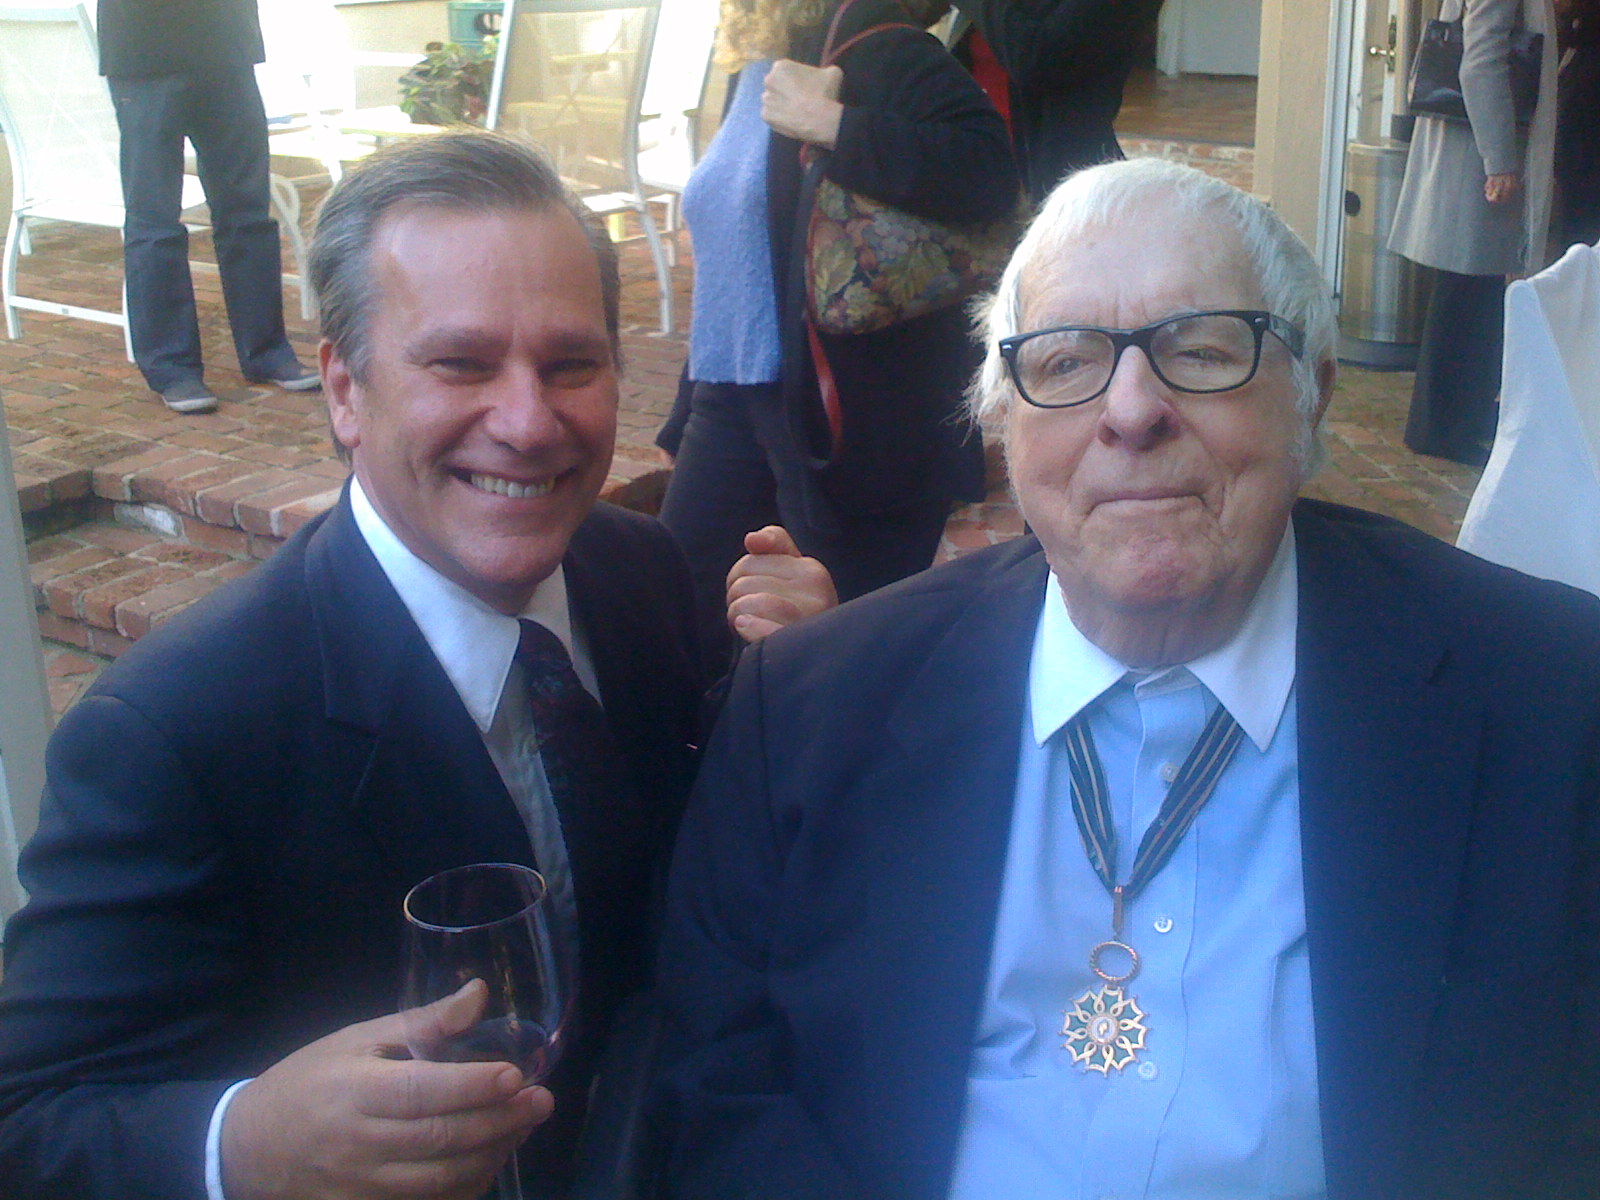 With Ray Bradbury at the French Consulate party